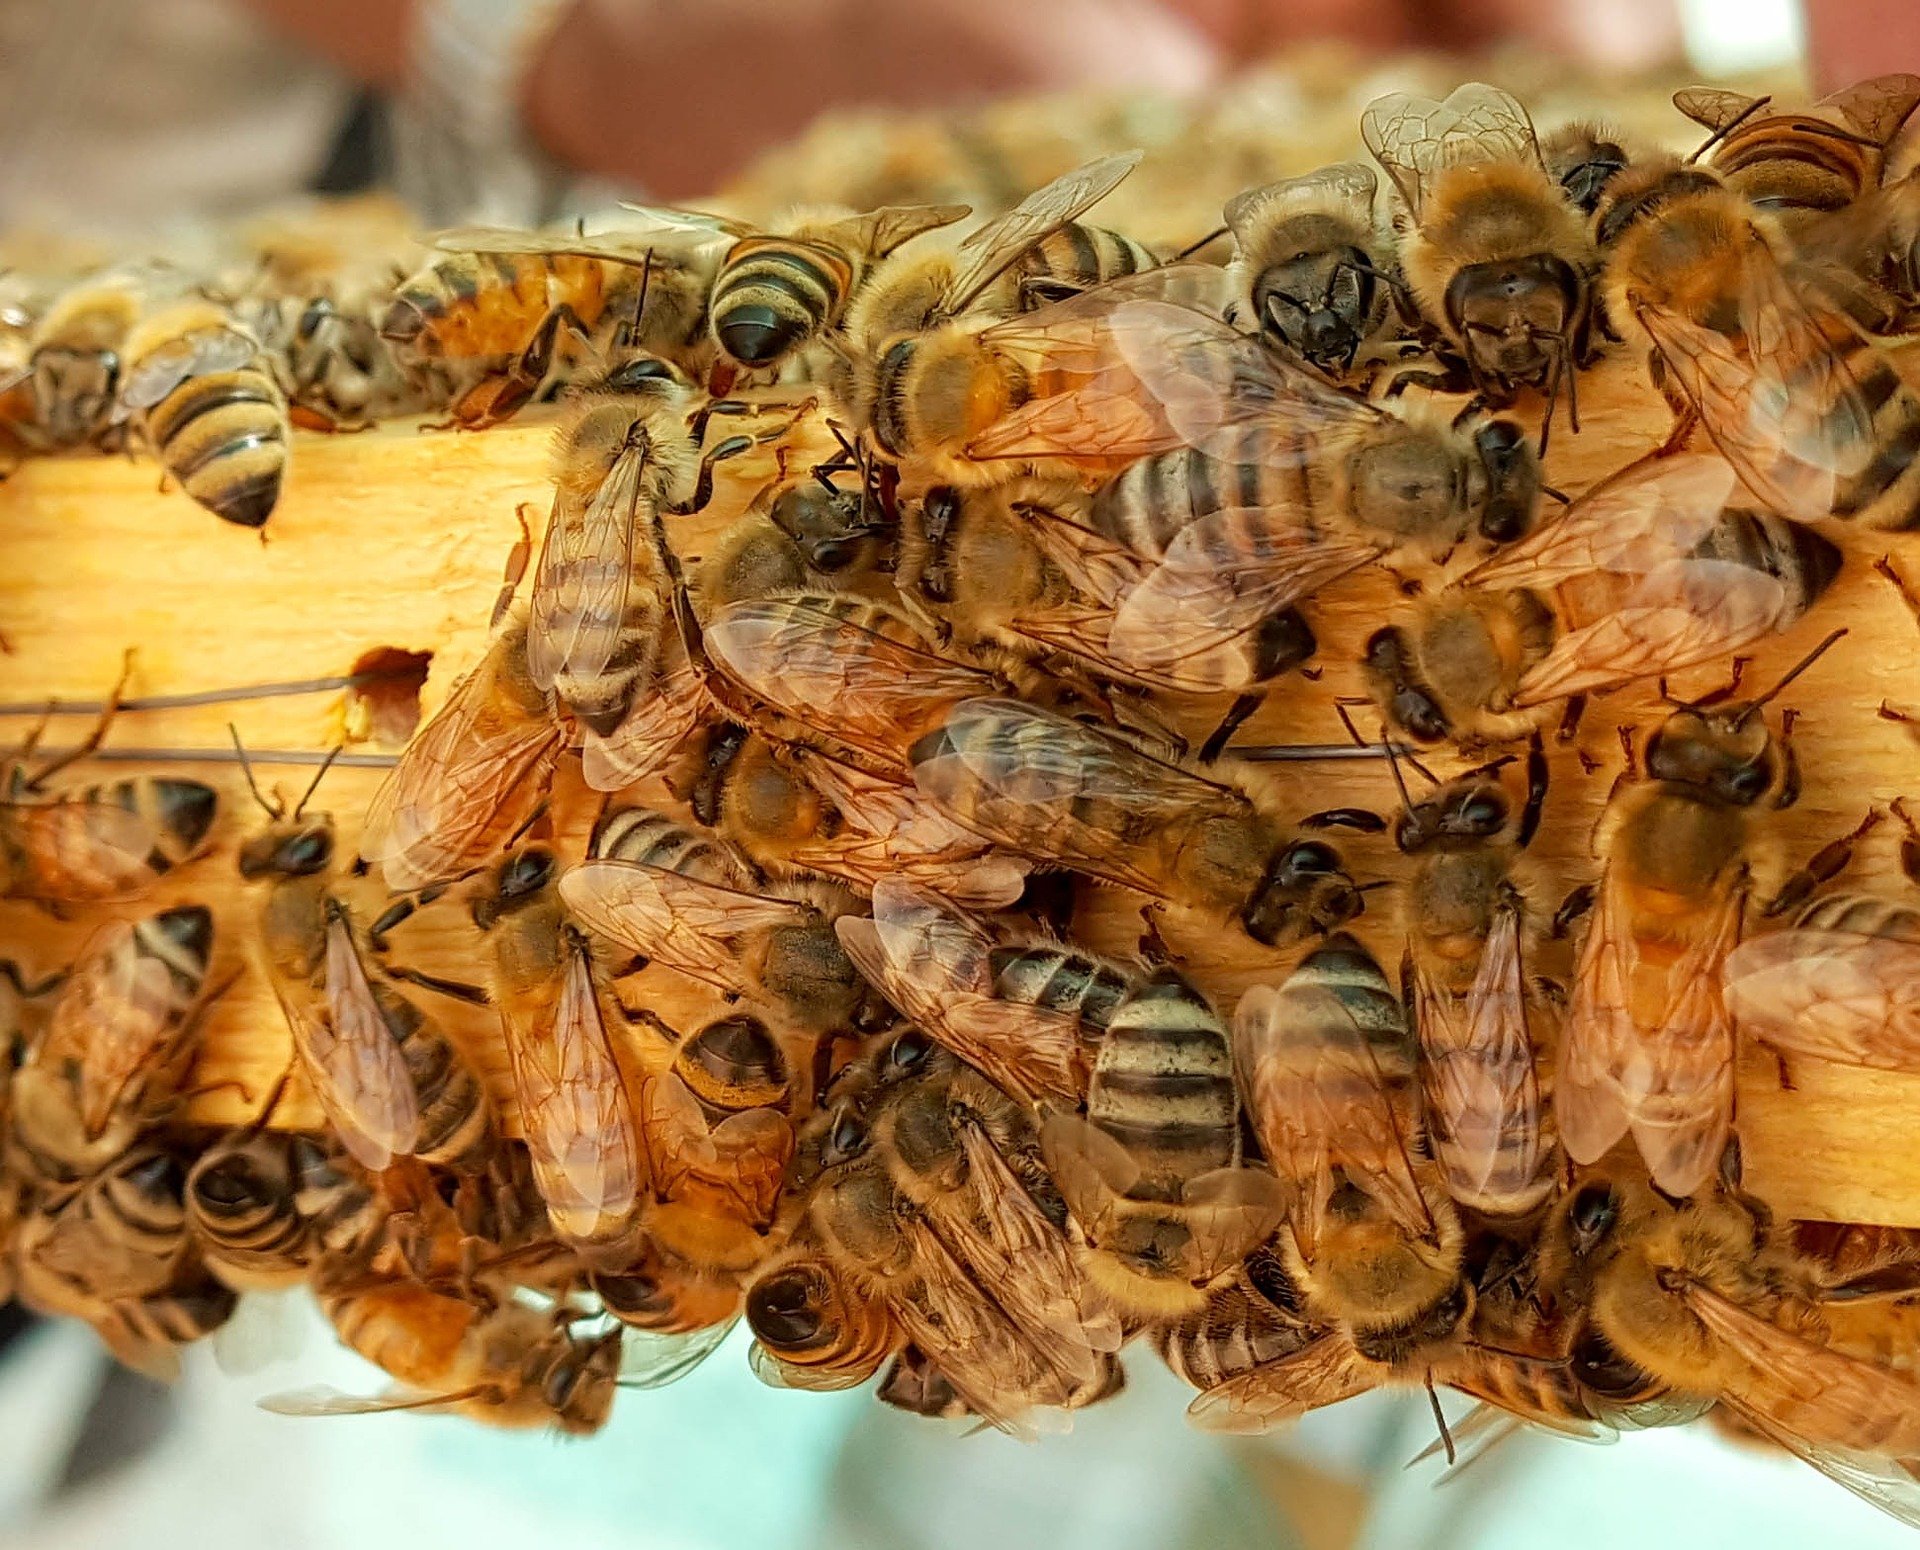 Chemicals in brain that make honeybees more likely to sting discovered